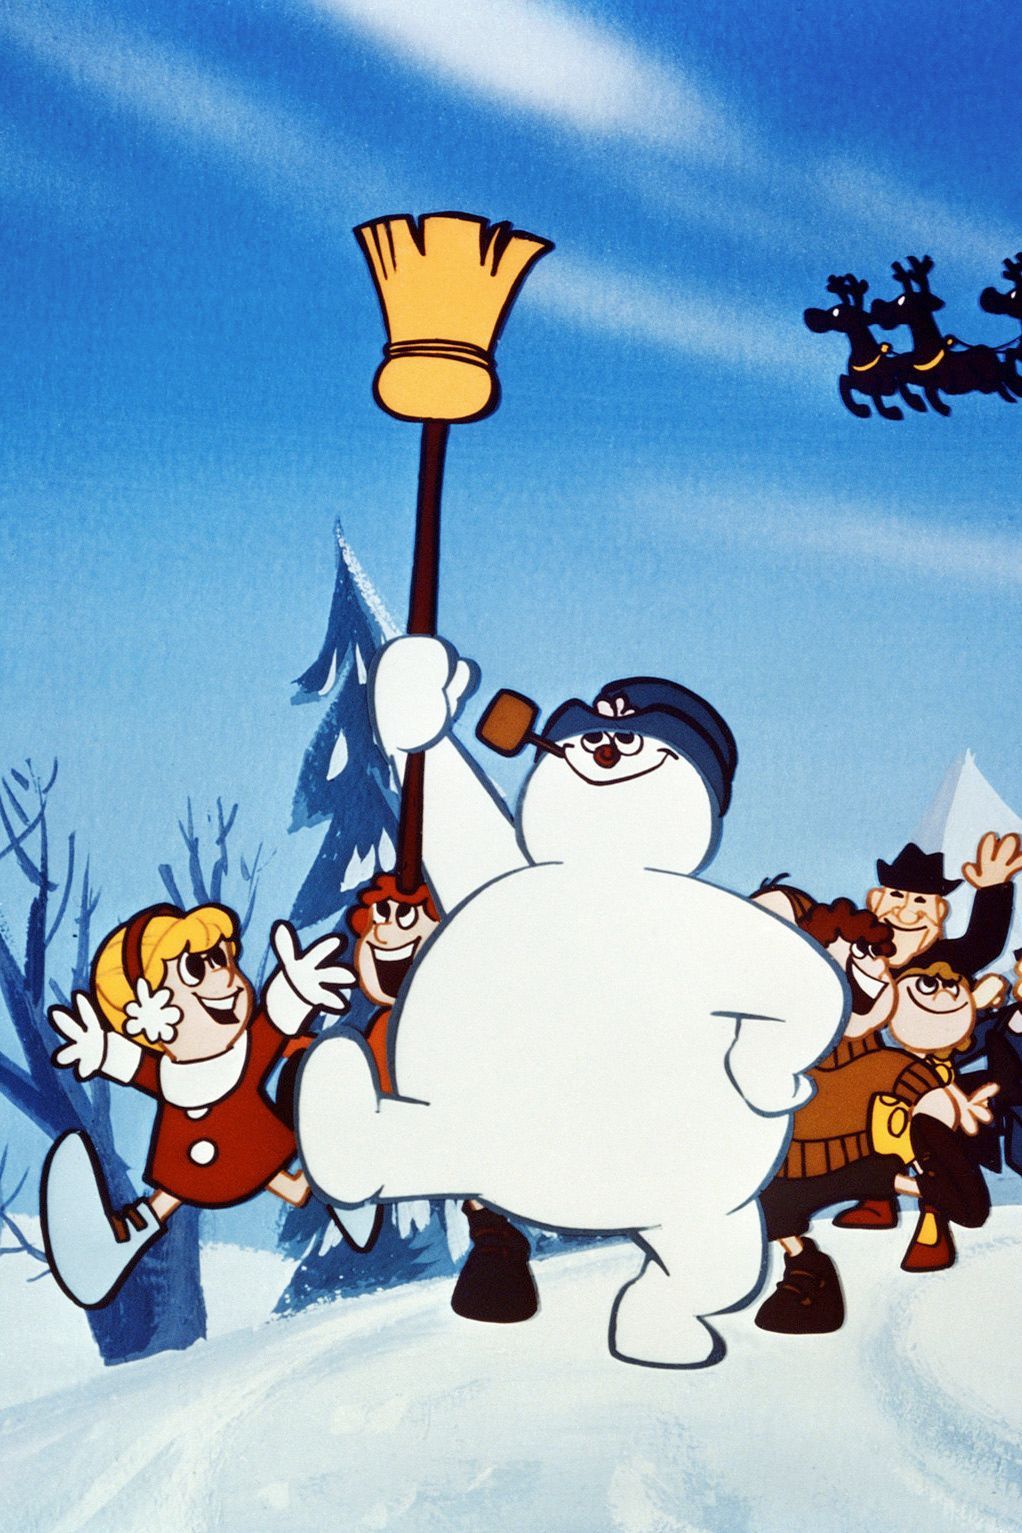 CBS Announces Christmas Specials from Rudolph the Red-Nosed Reindeer to Frosty t